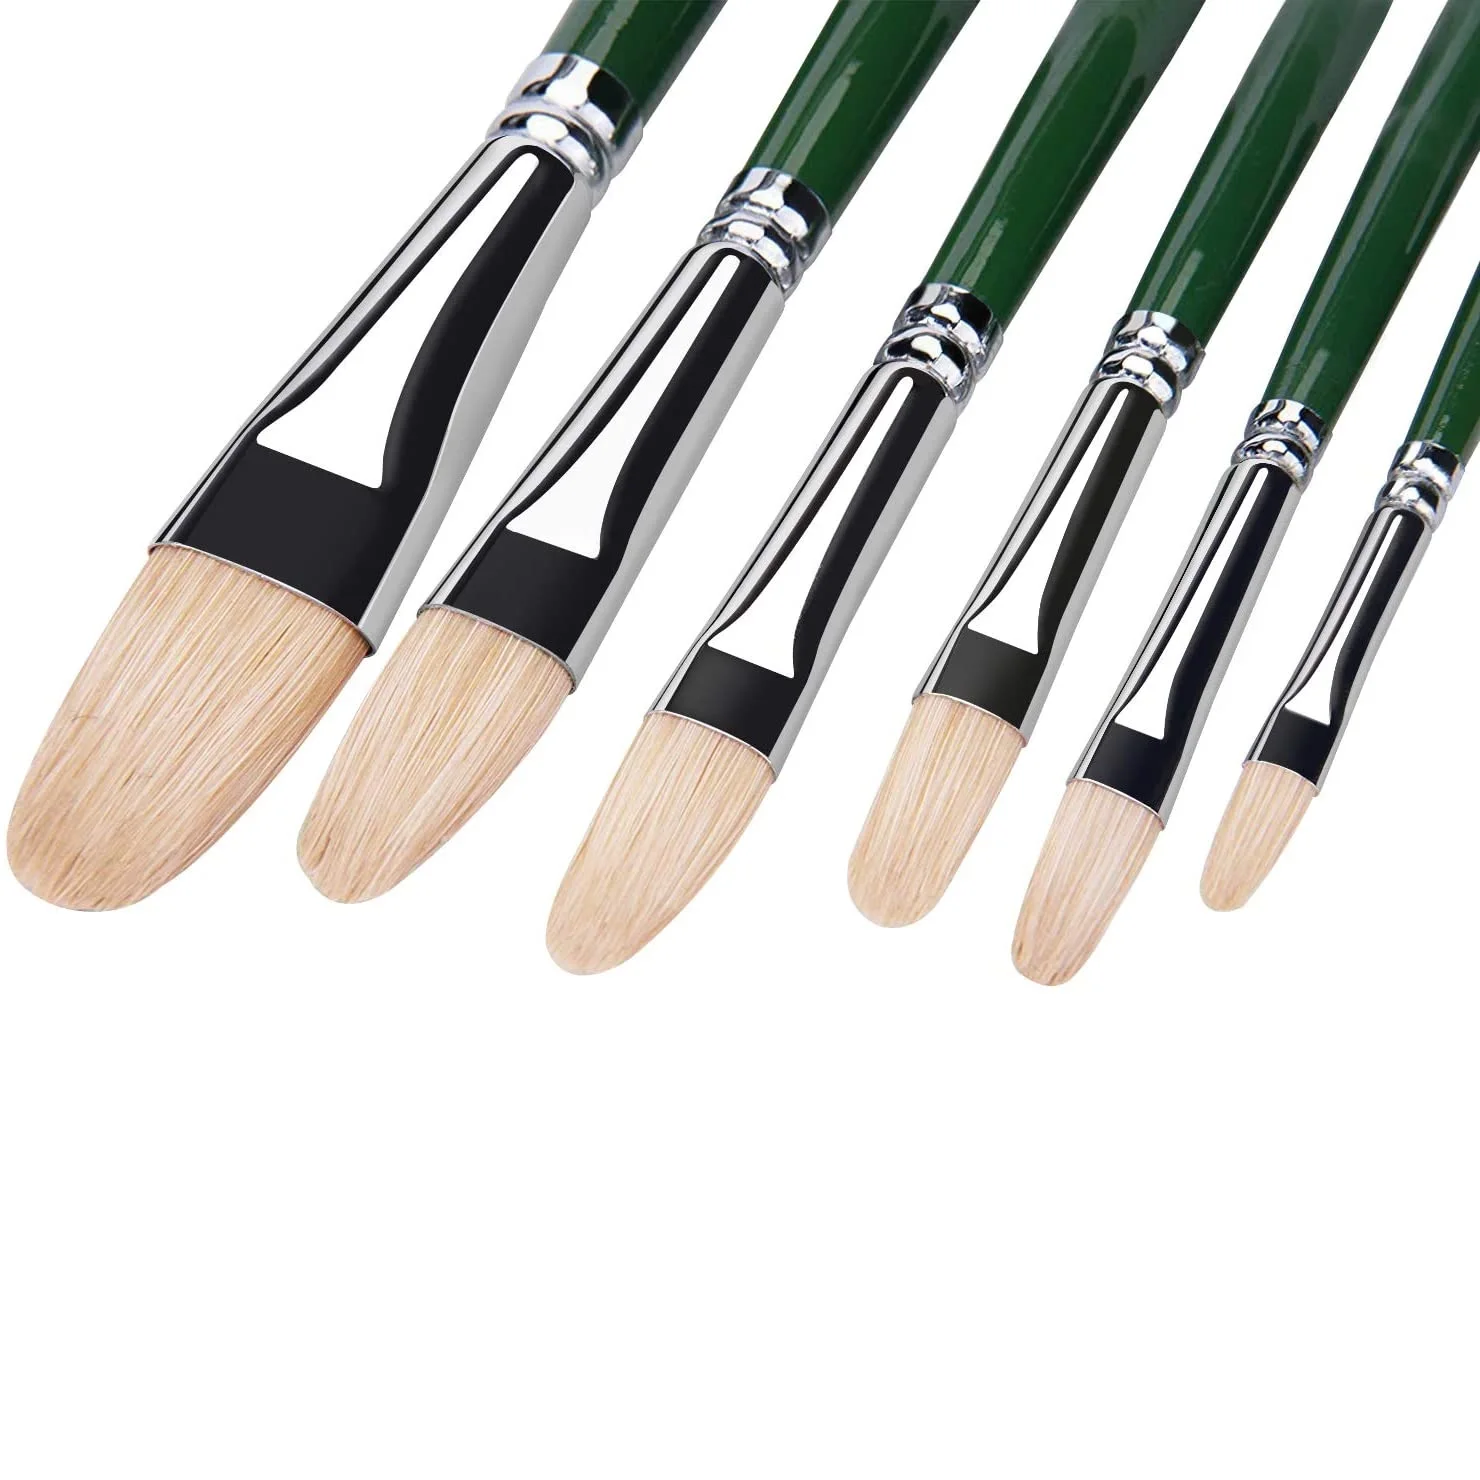 Oil Acrylic Watercolor Paint Brushes Set with Natural Hog Hair